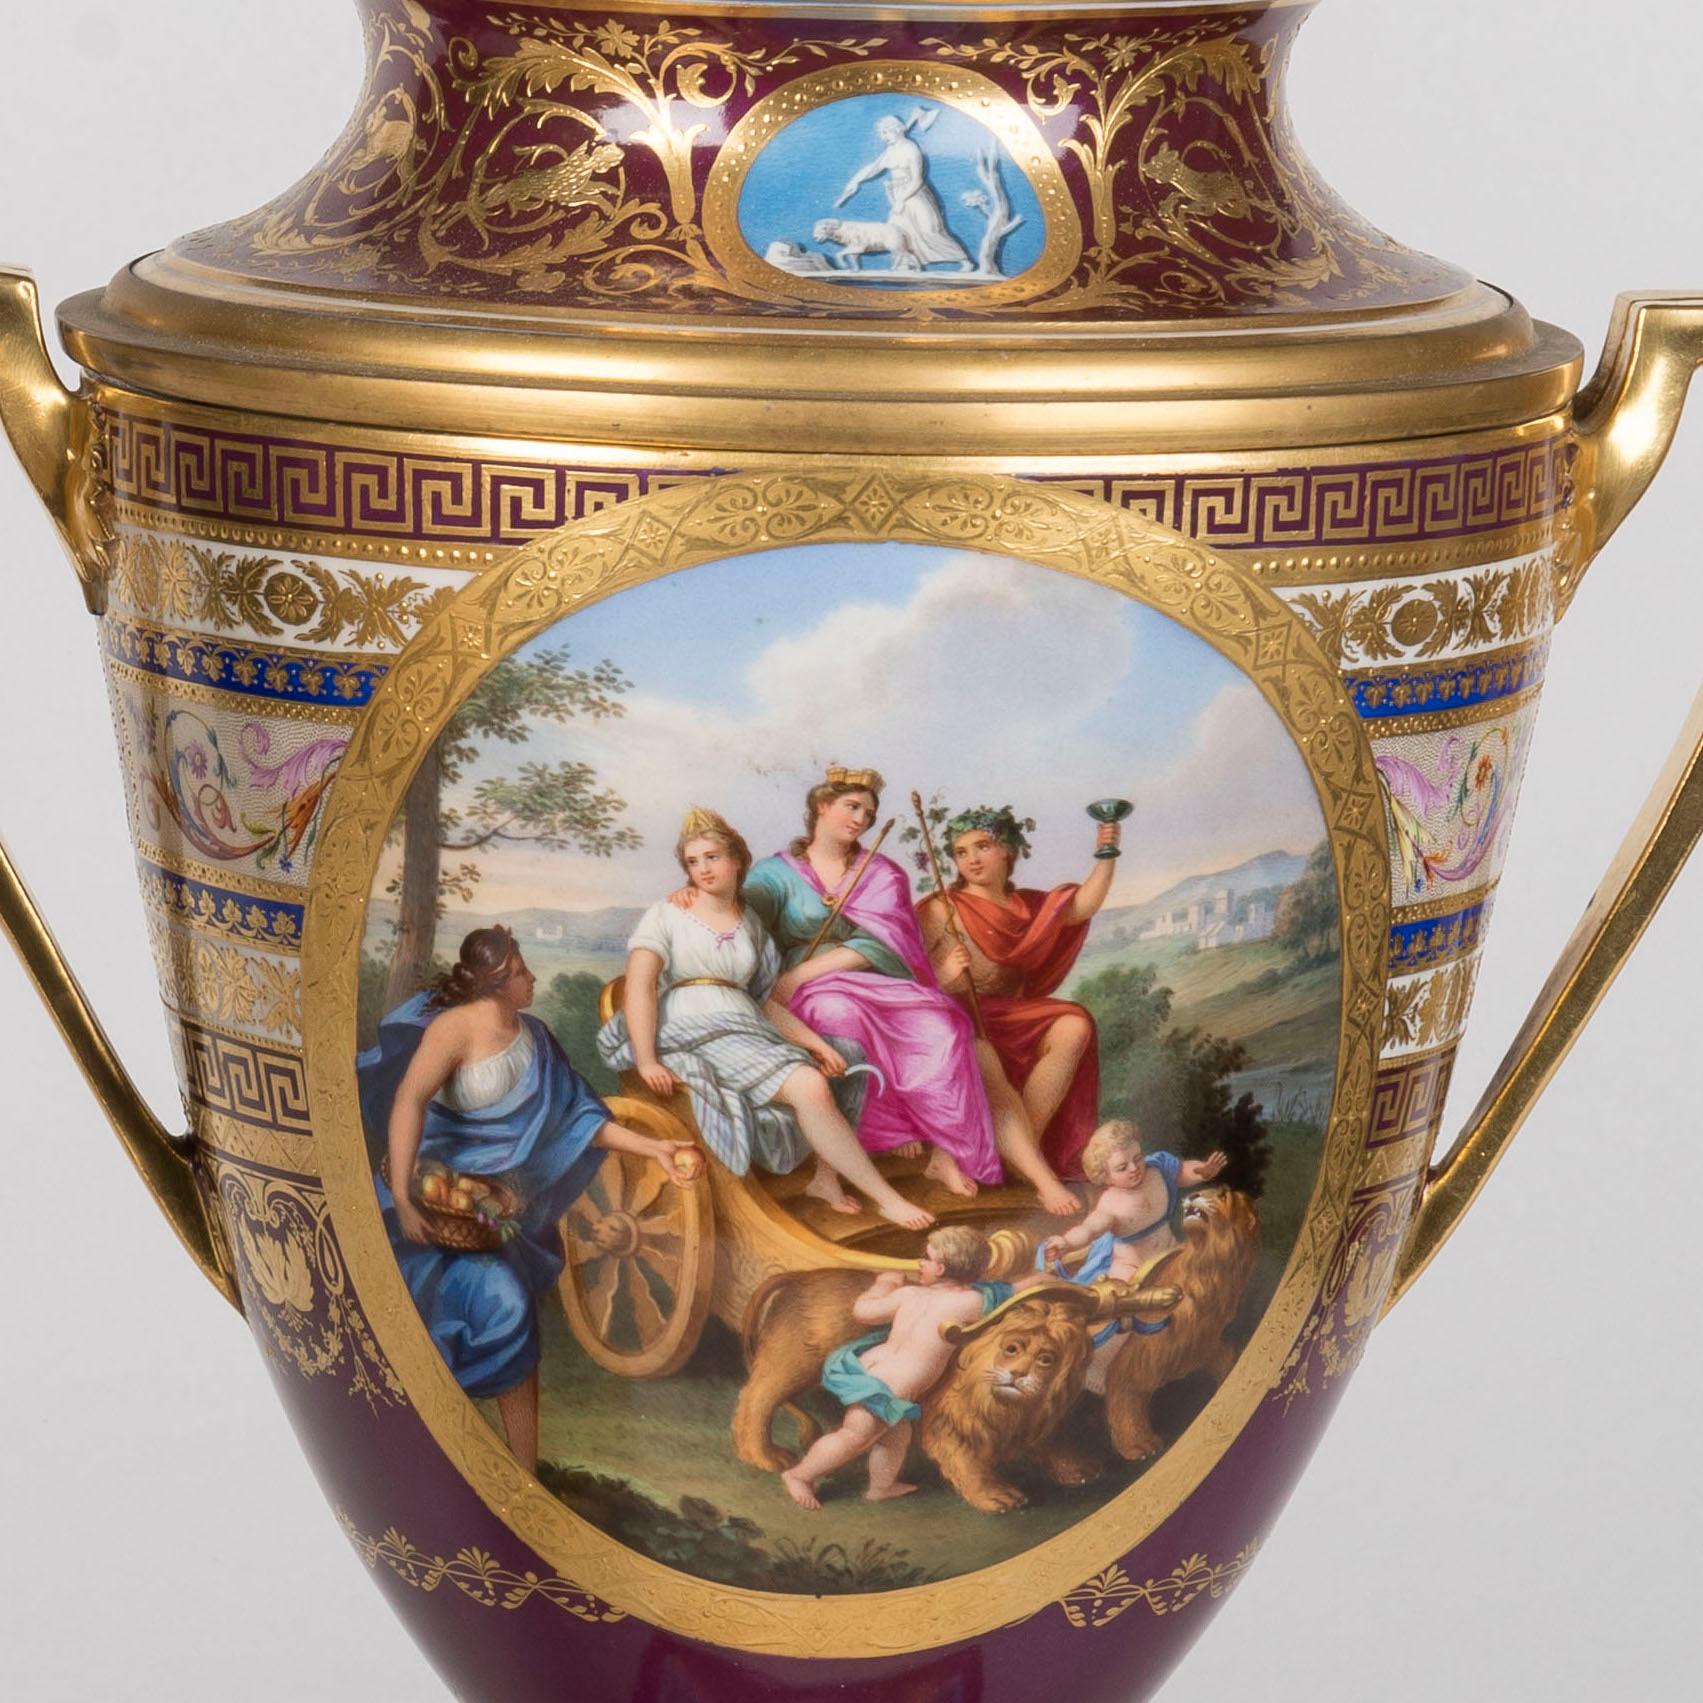 Rare 19th Century Viennese Porcelain Hand-Painted Ice Cream Pail Vases For Sale 1